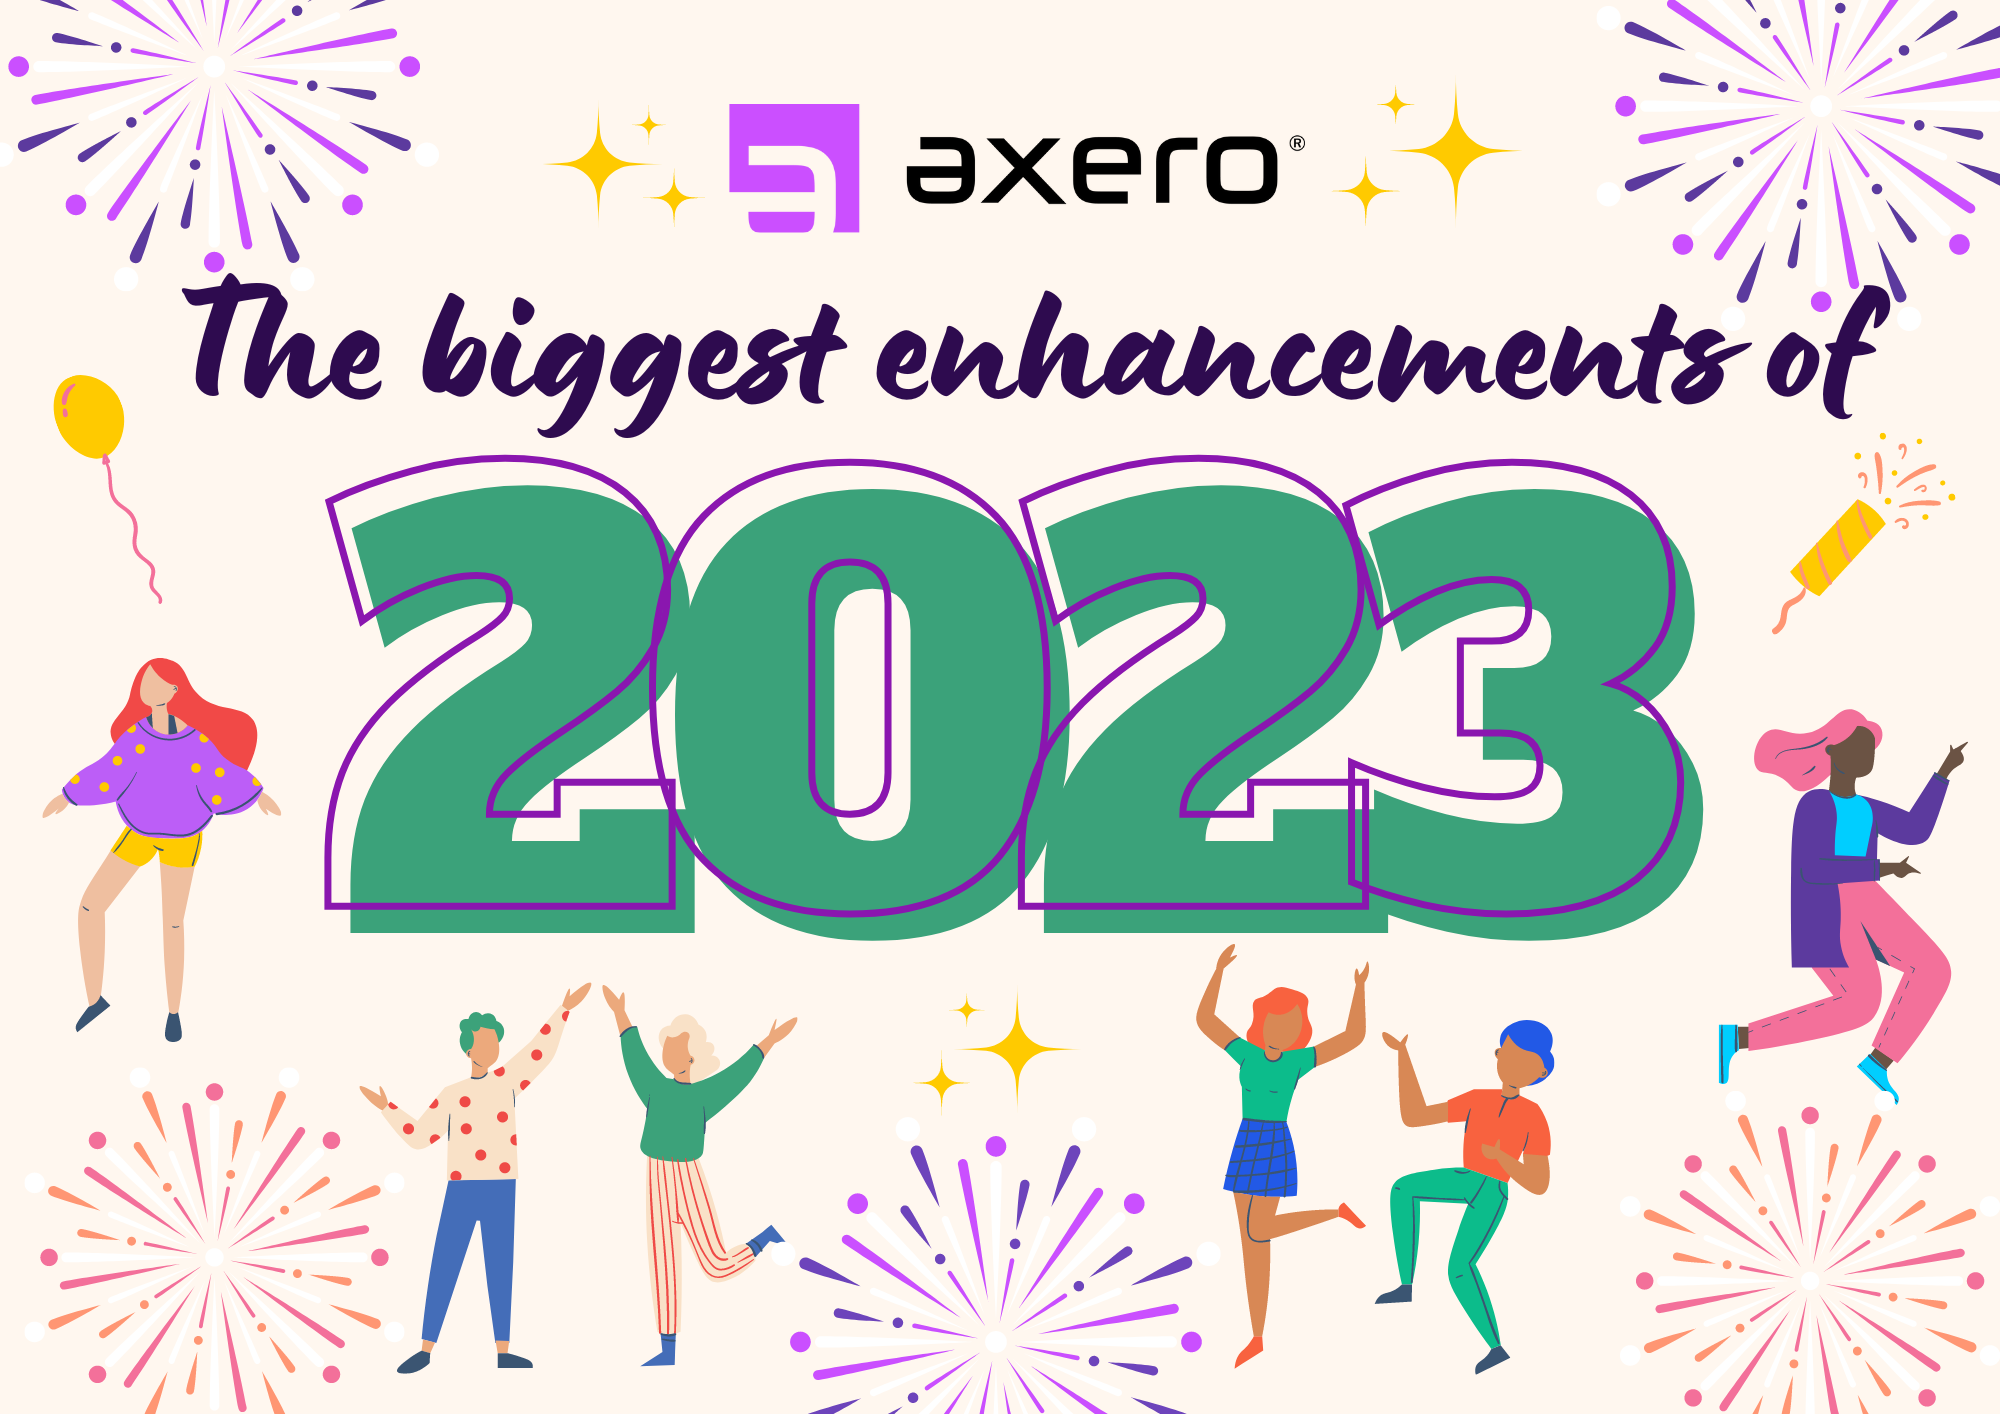 Axero Wrapped: 3 Intranet Innovations for 2023